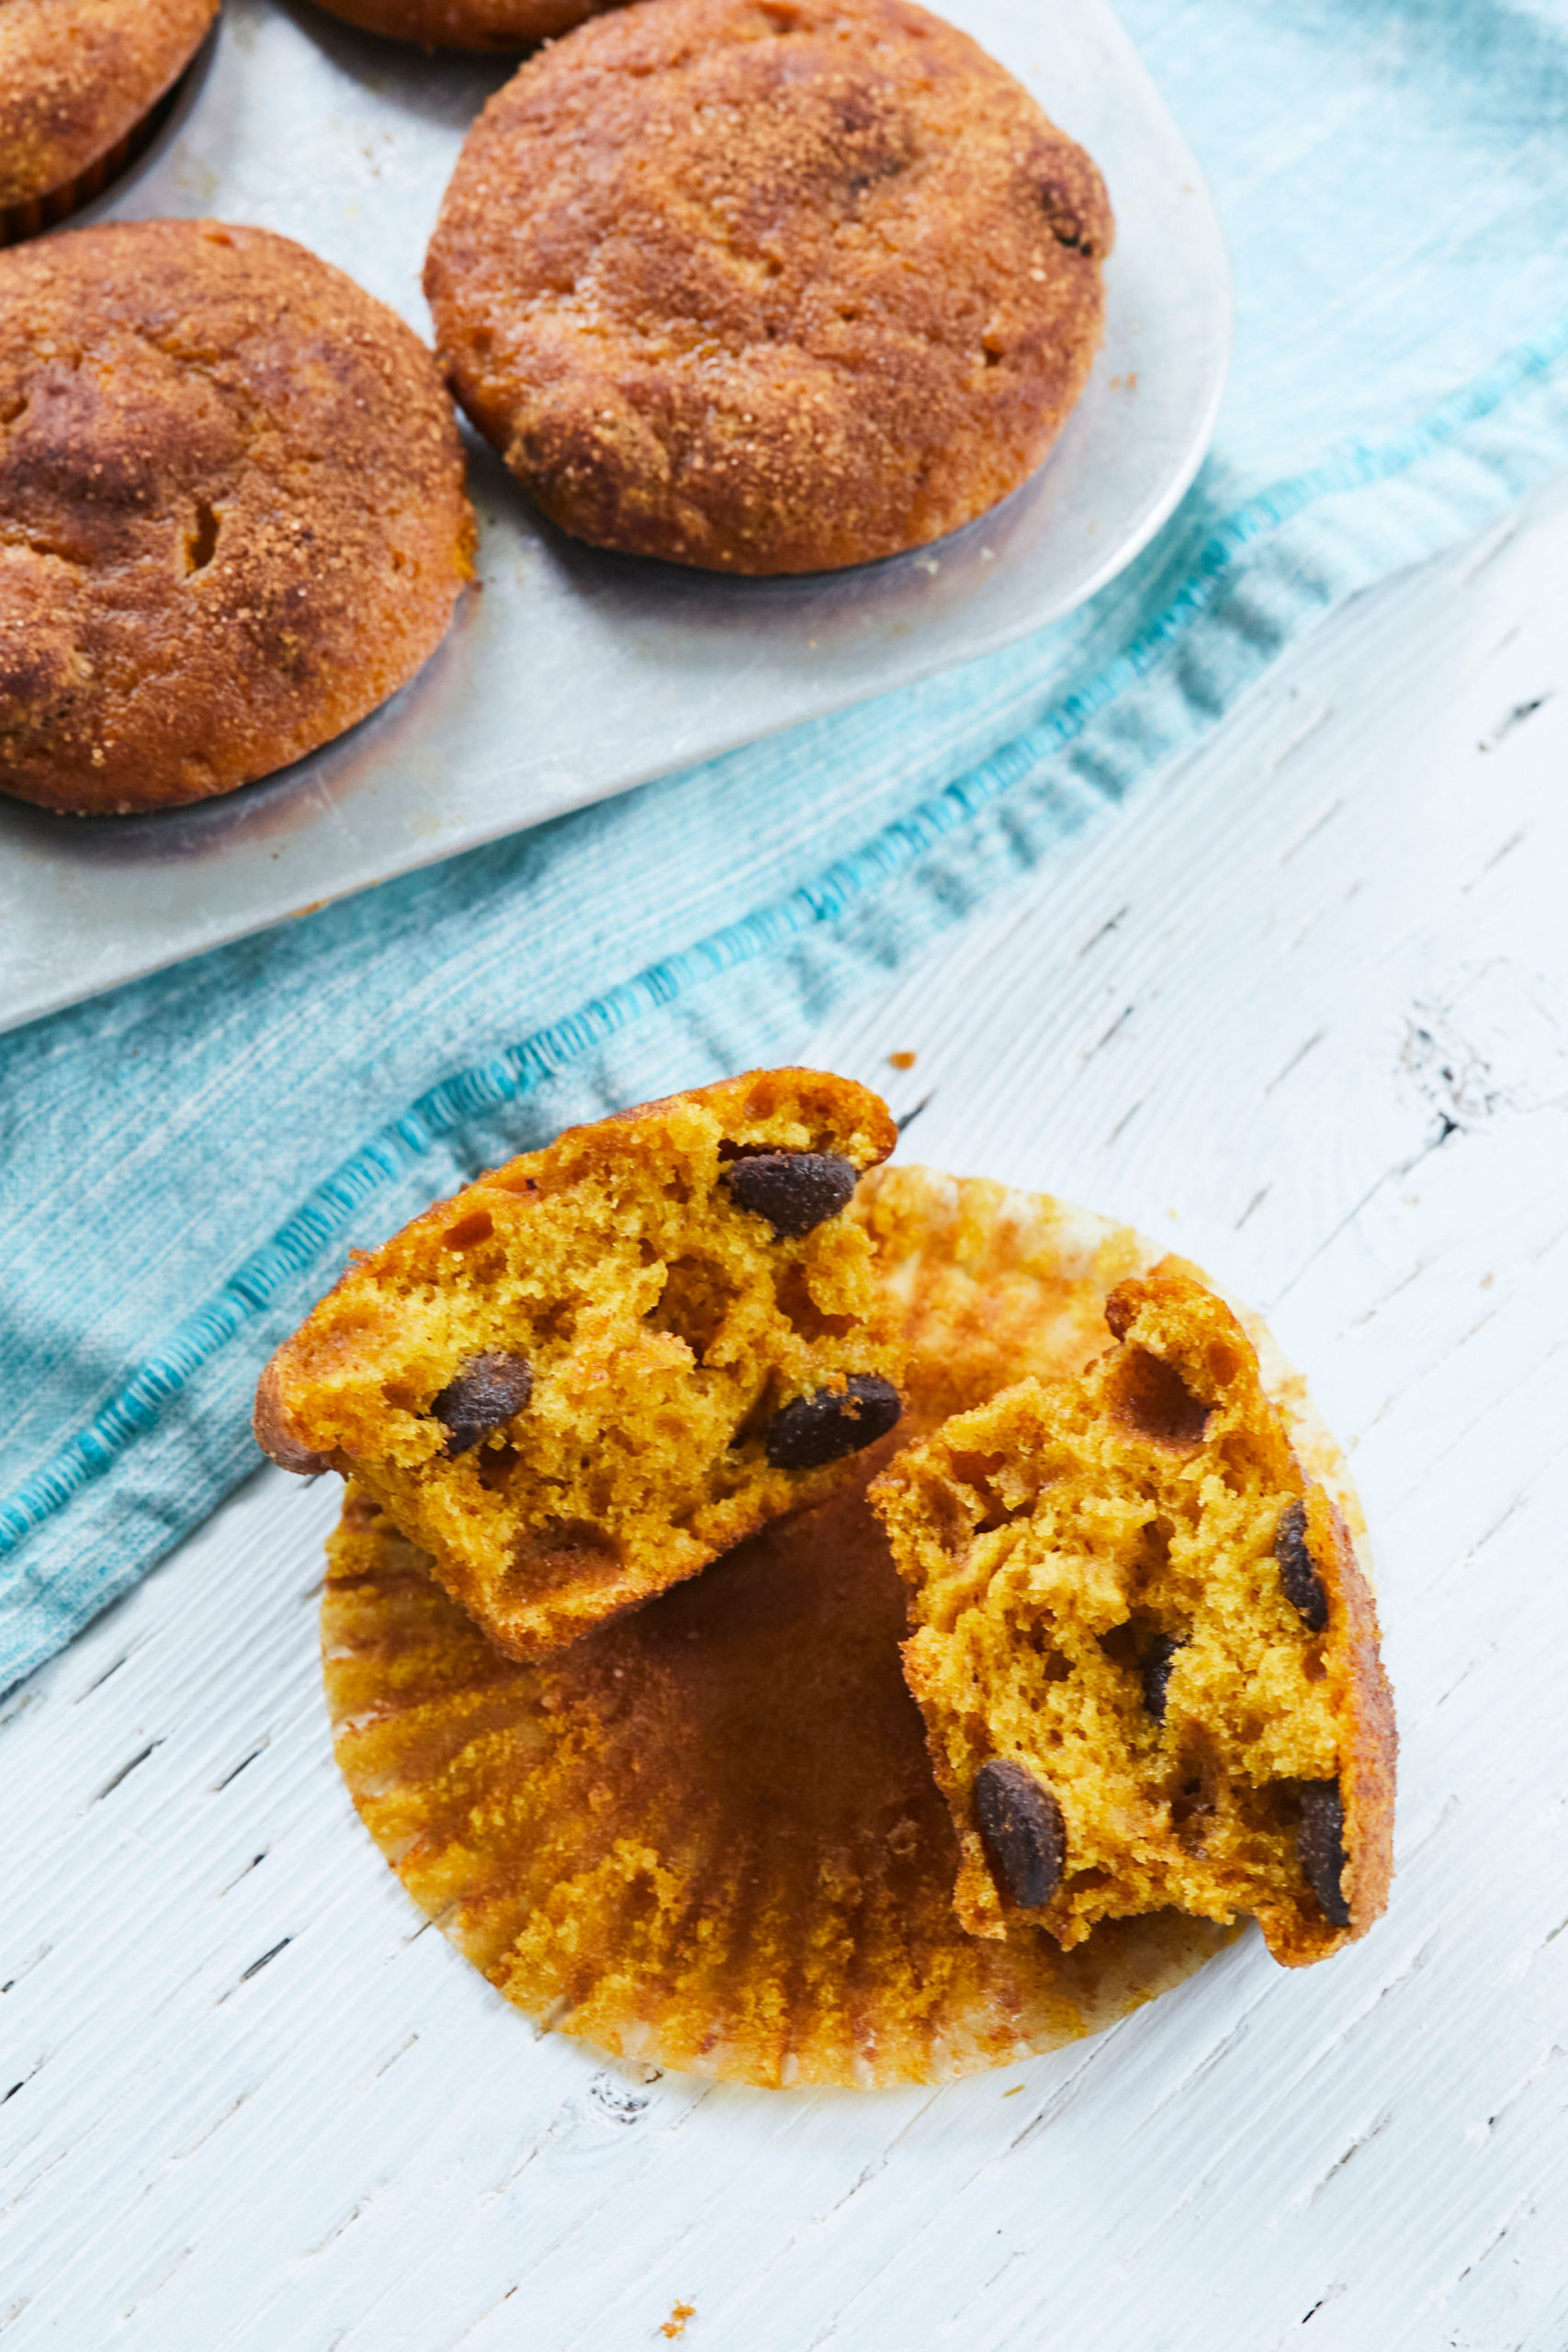 A pumpkin chocolate chip muffin is cut in half to show its orangish hue and big chunks of chocolate chips.